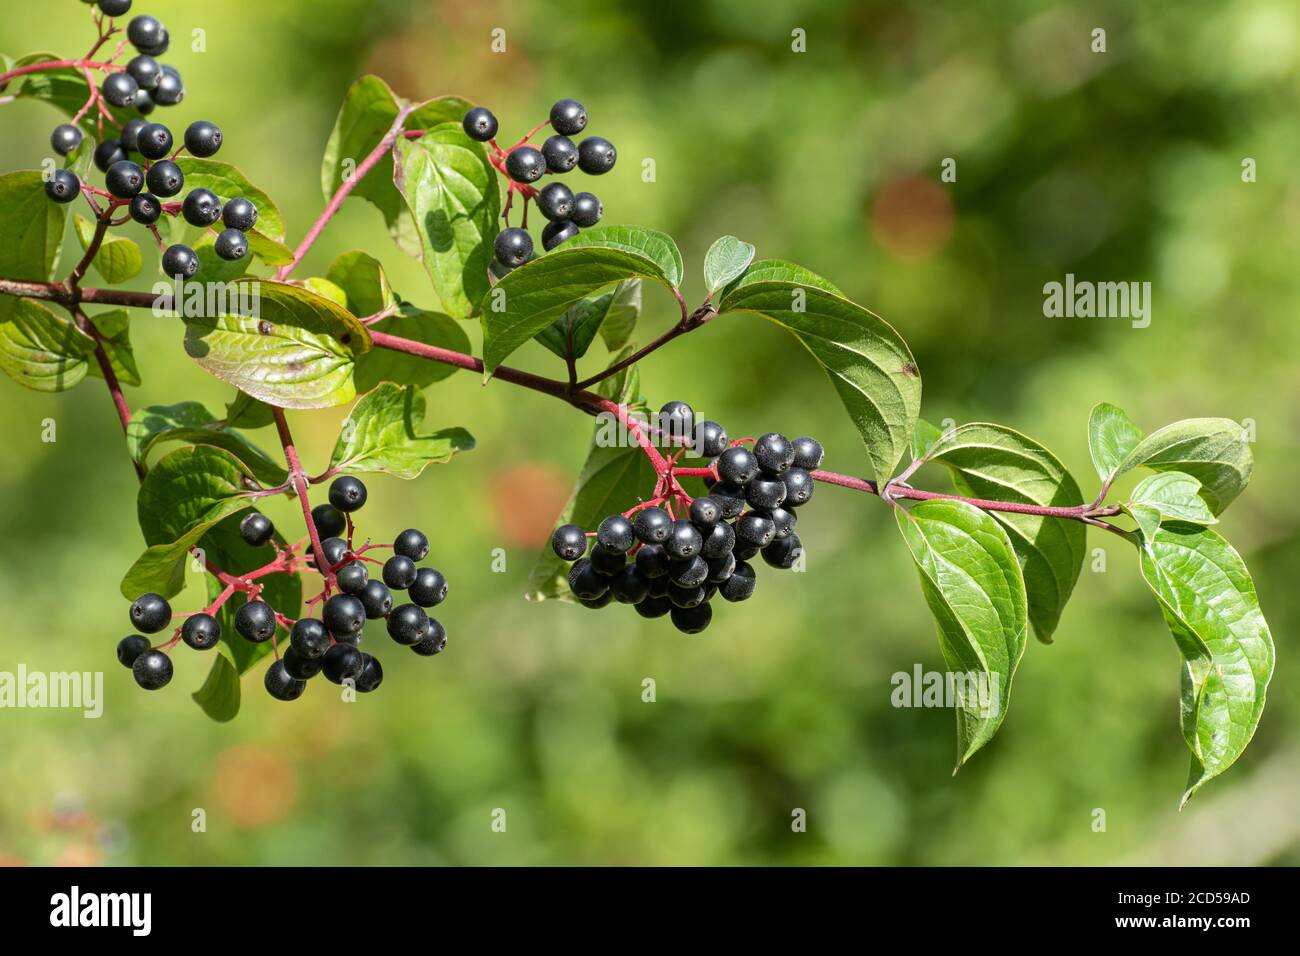 Dogwood shrub (Cornus sanguinea) with clusters of black berries (dogberries) and red twigs growing wild in a hedgerow, late summer, UK Stock Photo